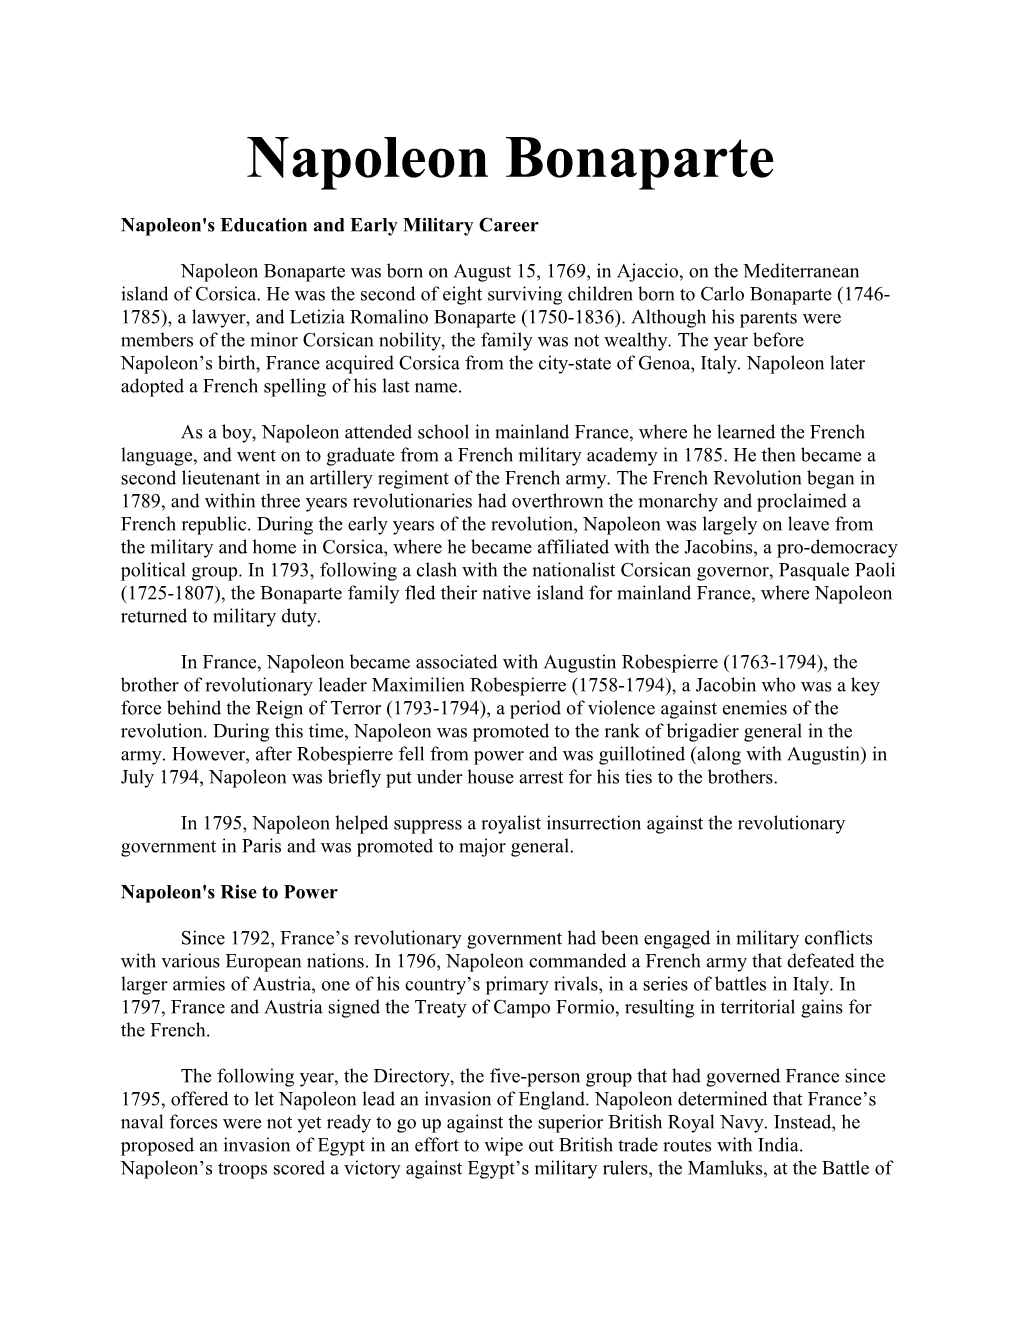 Napoleon's Education and Early Military Career